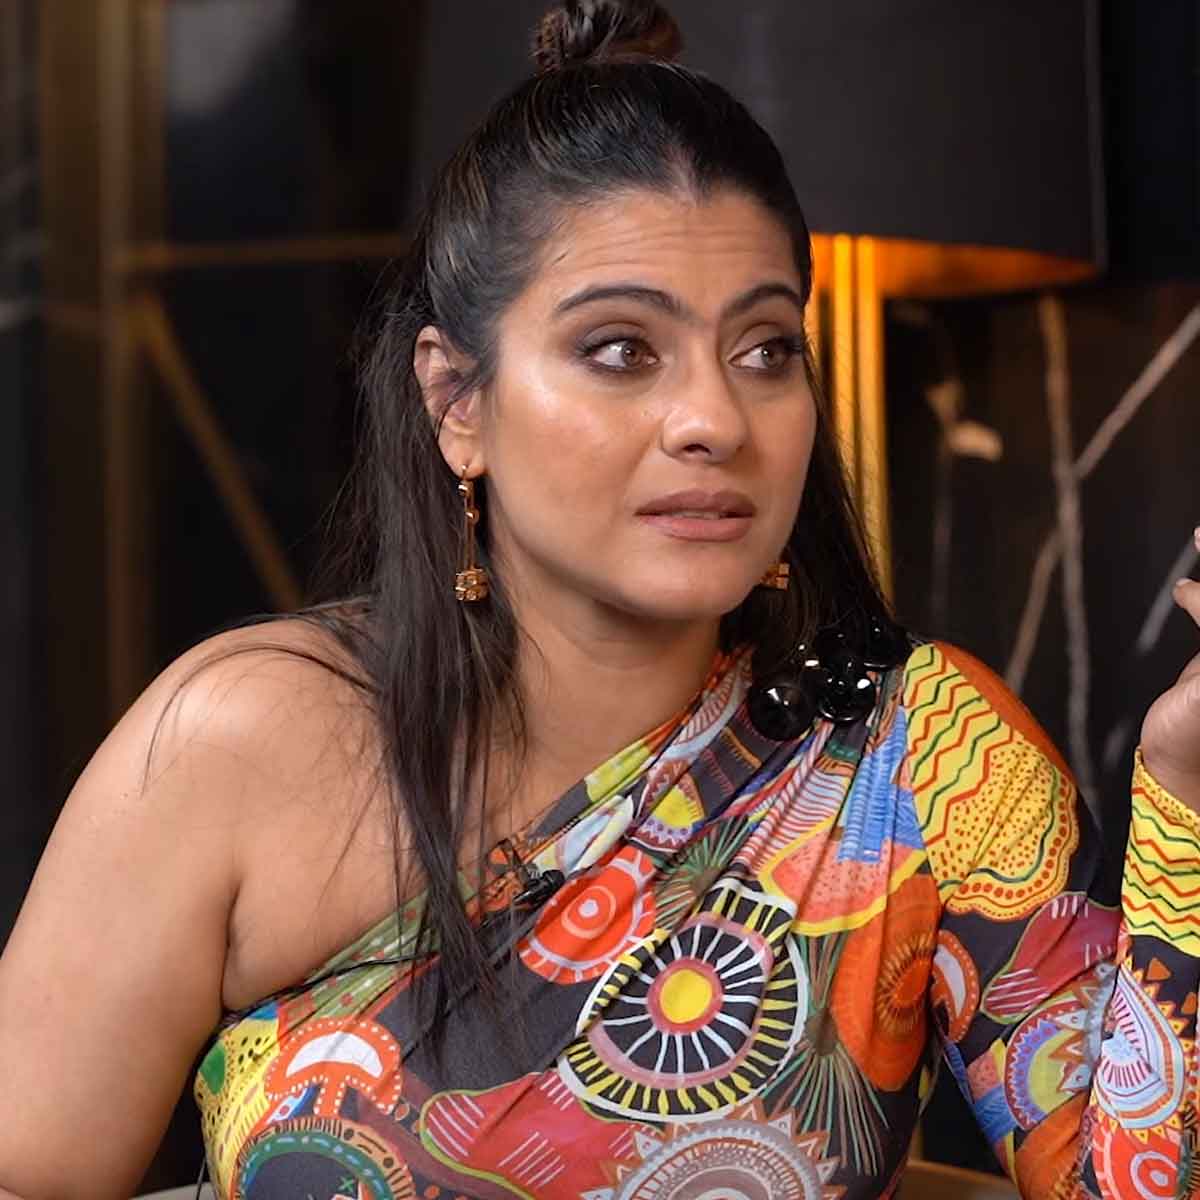 Ww Kajol Xx - EXCLUSIVE: Kajol wants to work on good scripts as she completes 30 years;  Proud of being invited to the Oscars | PINKVILLA